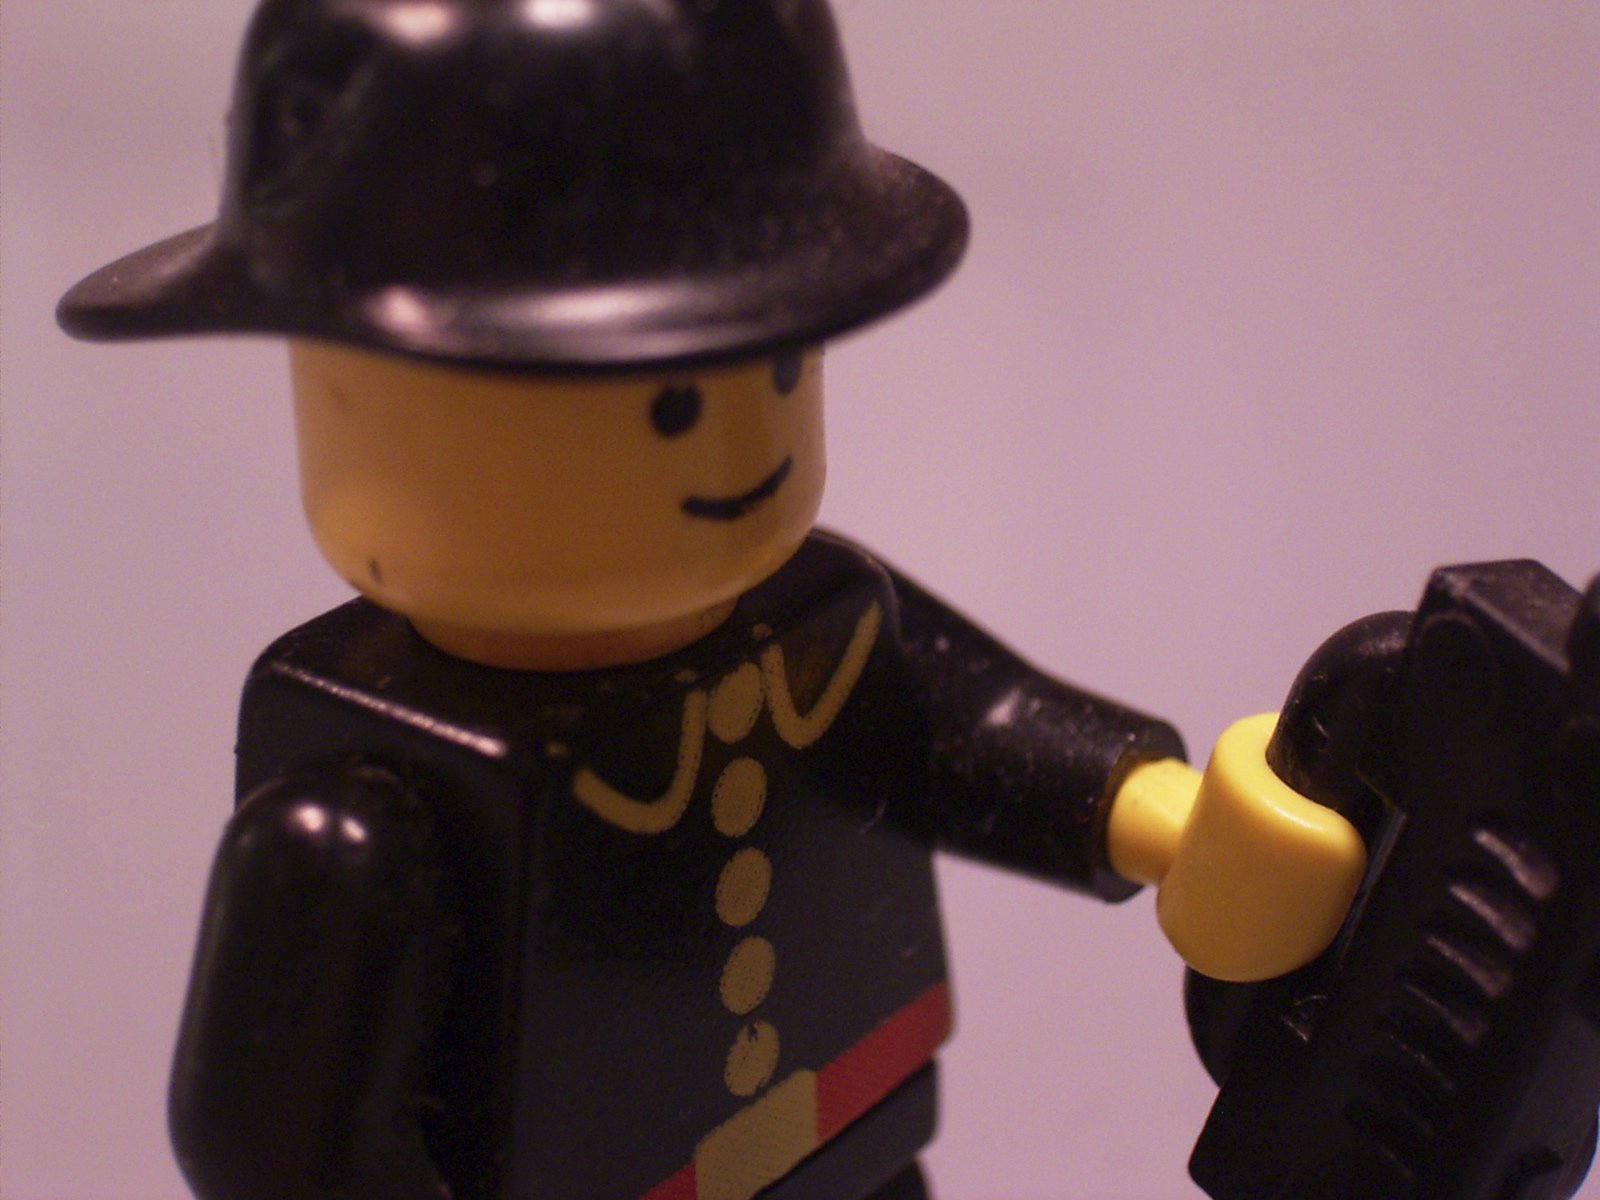 there is a lego person wearing an officer outfit